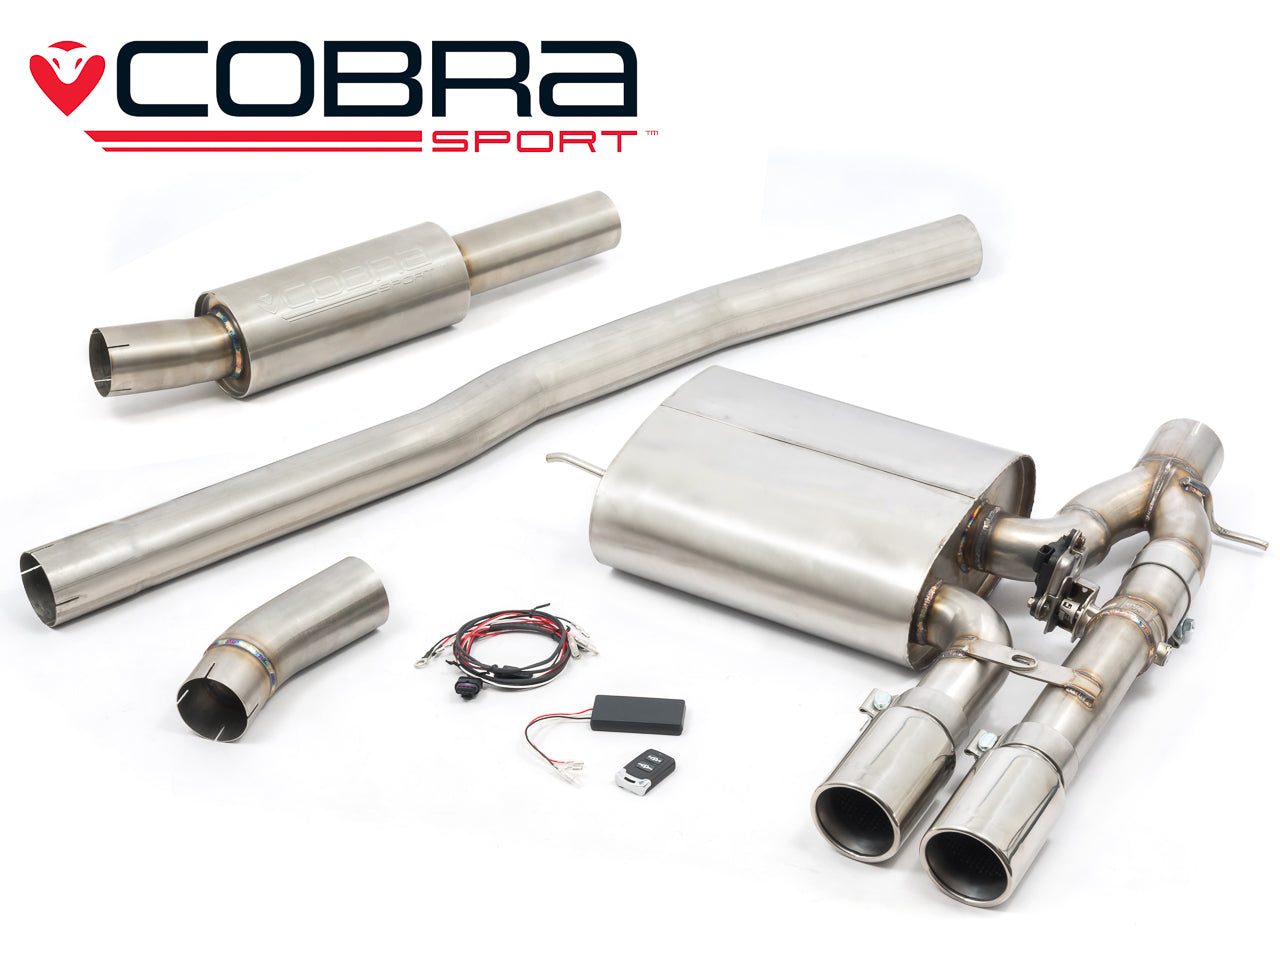 F56 Mini Cooper S Remote Valved Cat Back Performance Exhaust in 3" Stainless Steel Pipework